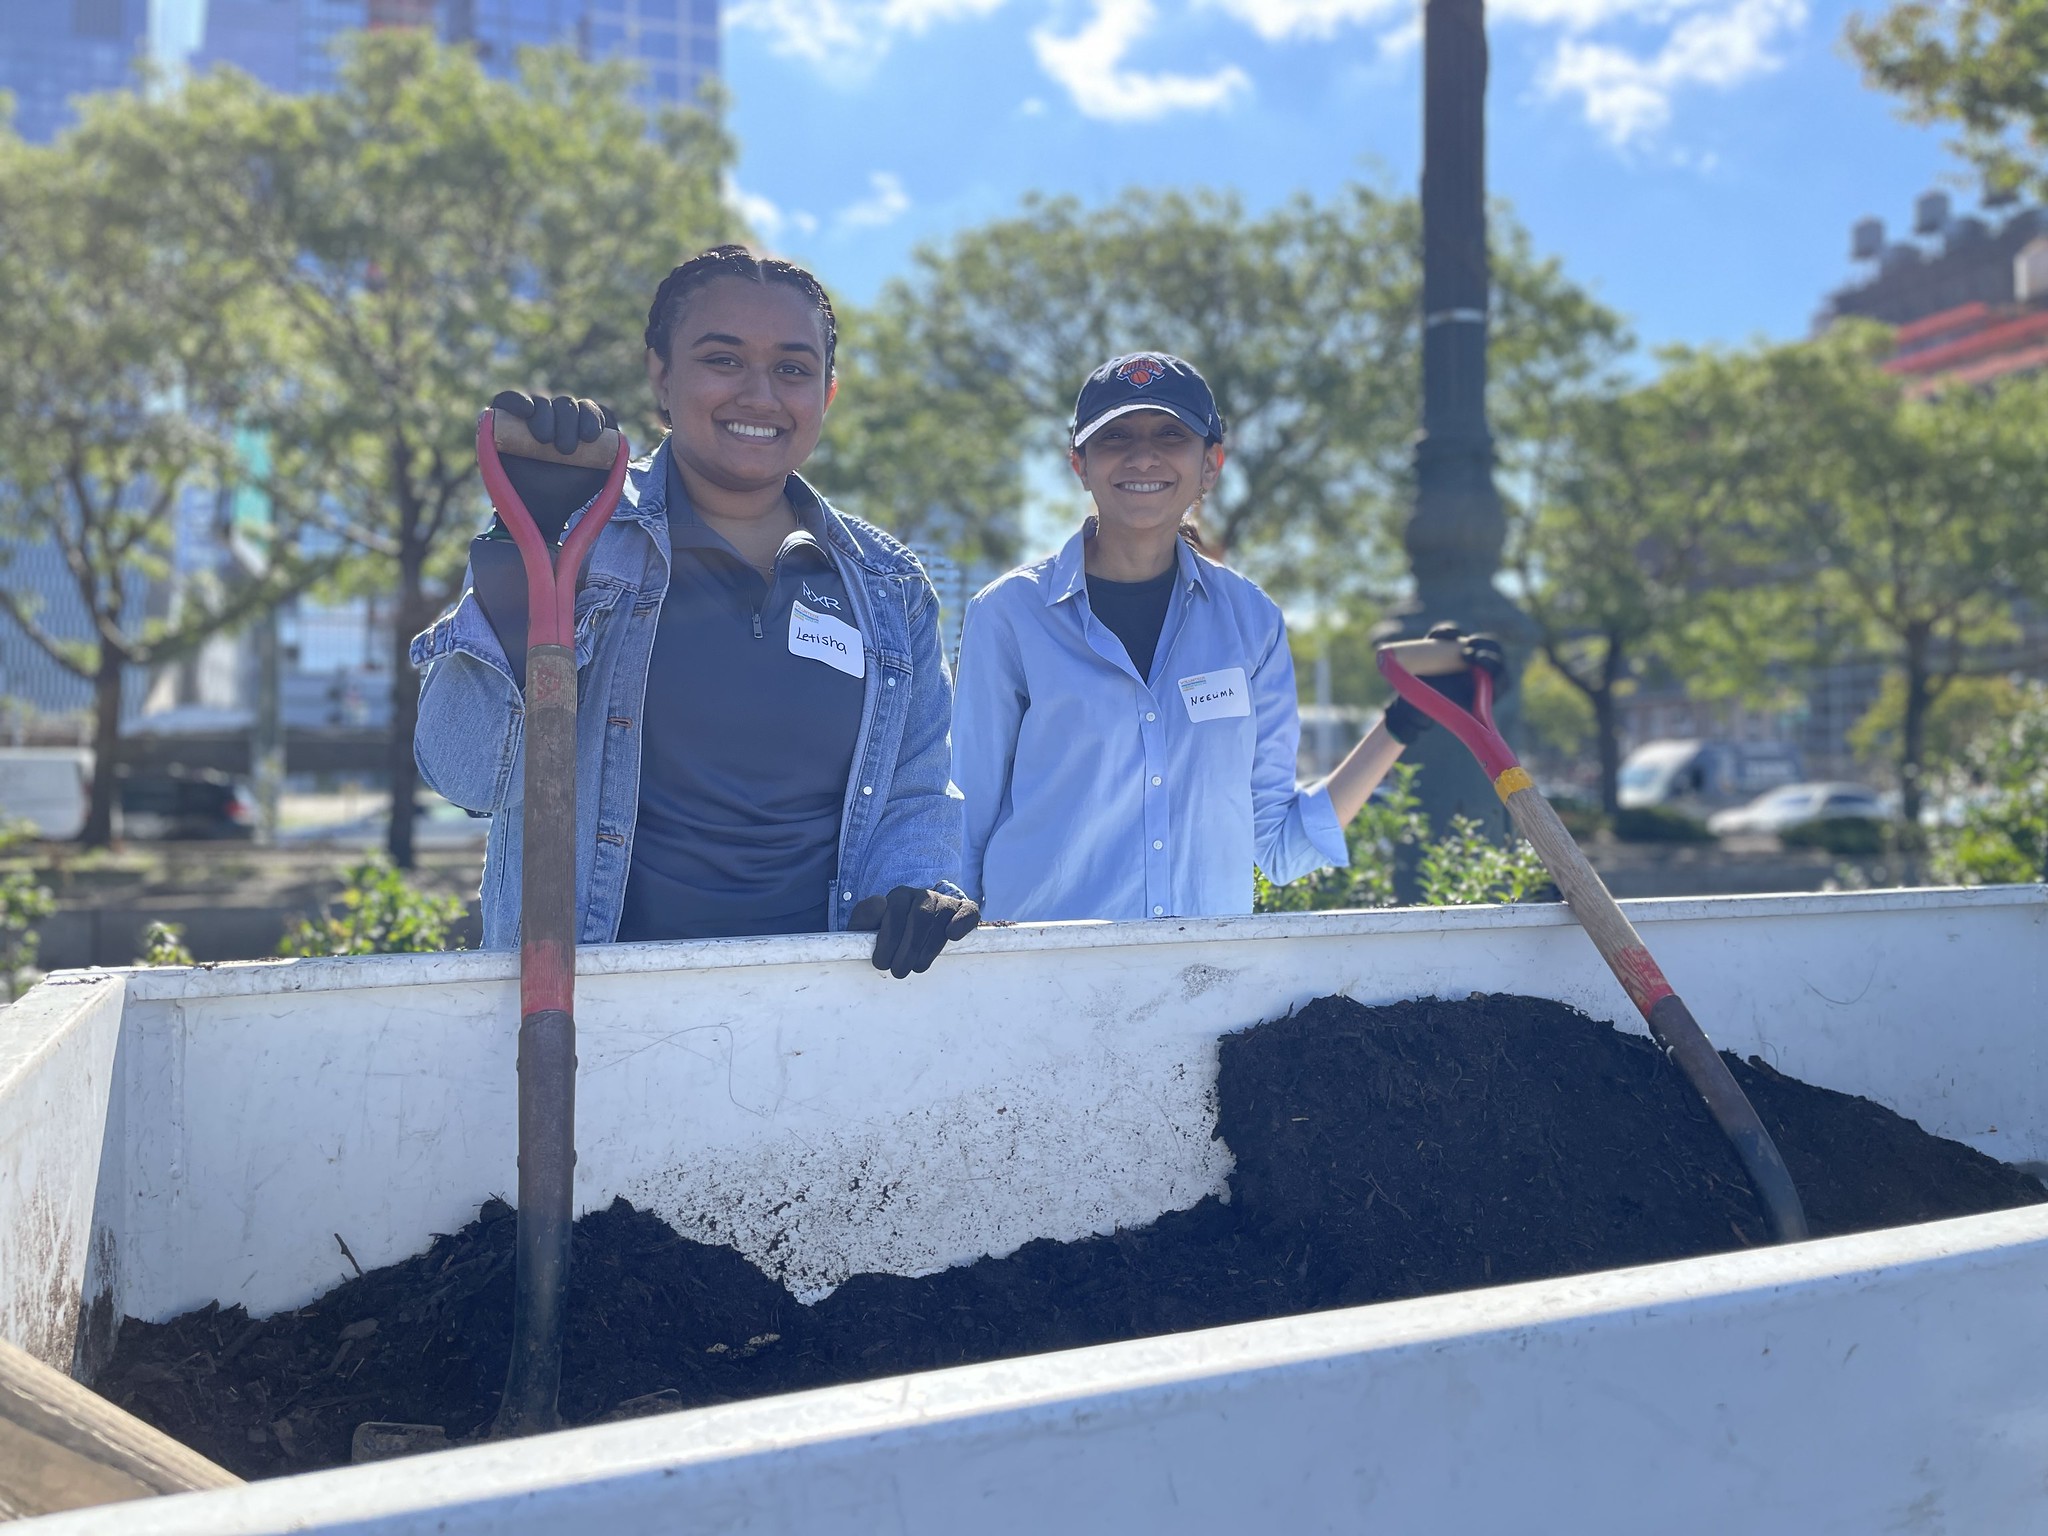 Two volunteers holding shovels pose for a photo behind a mulch container